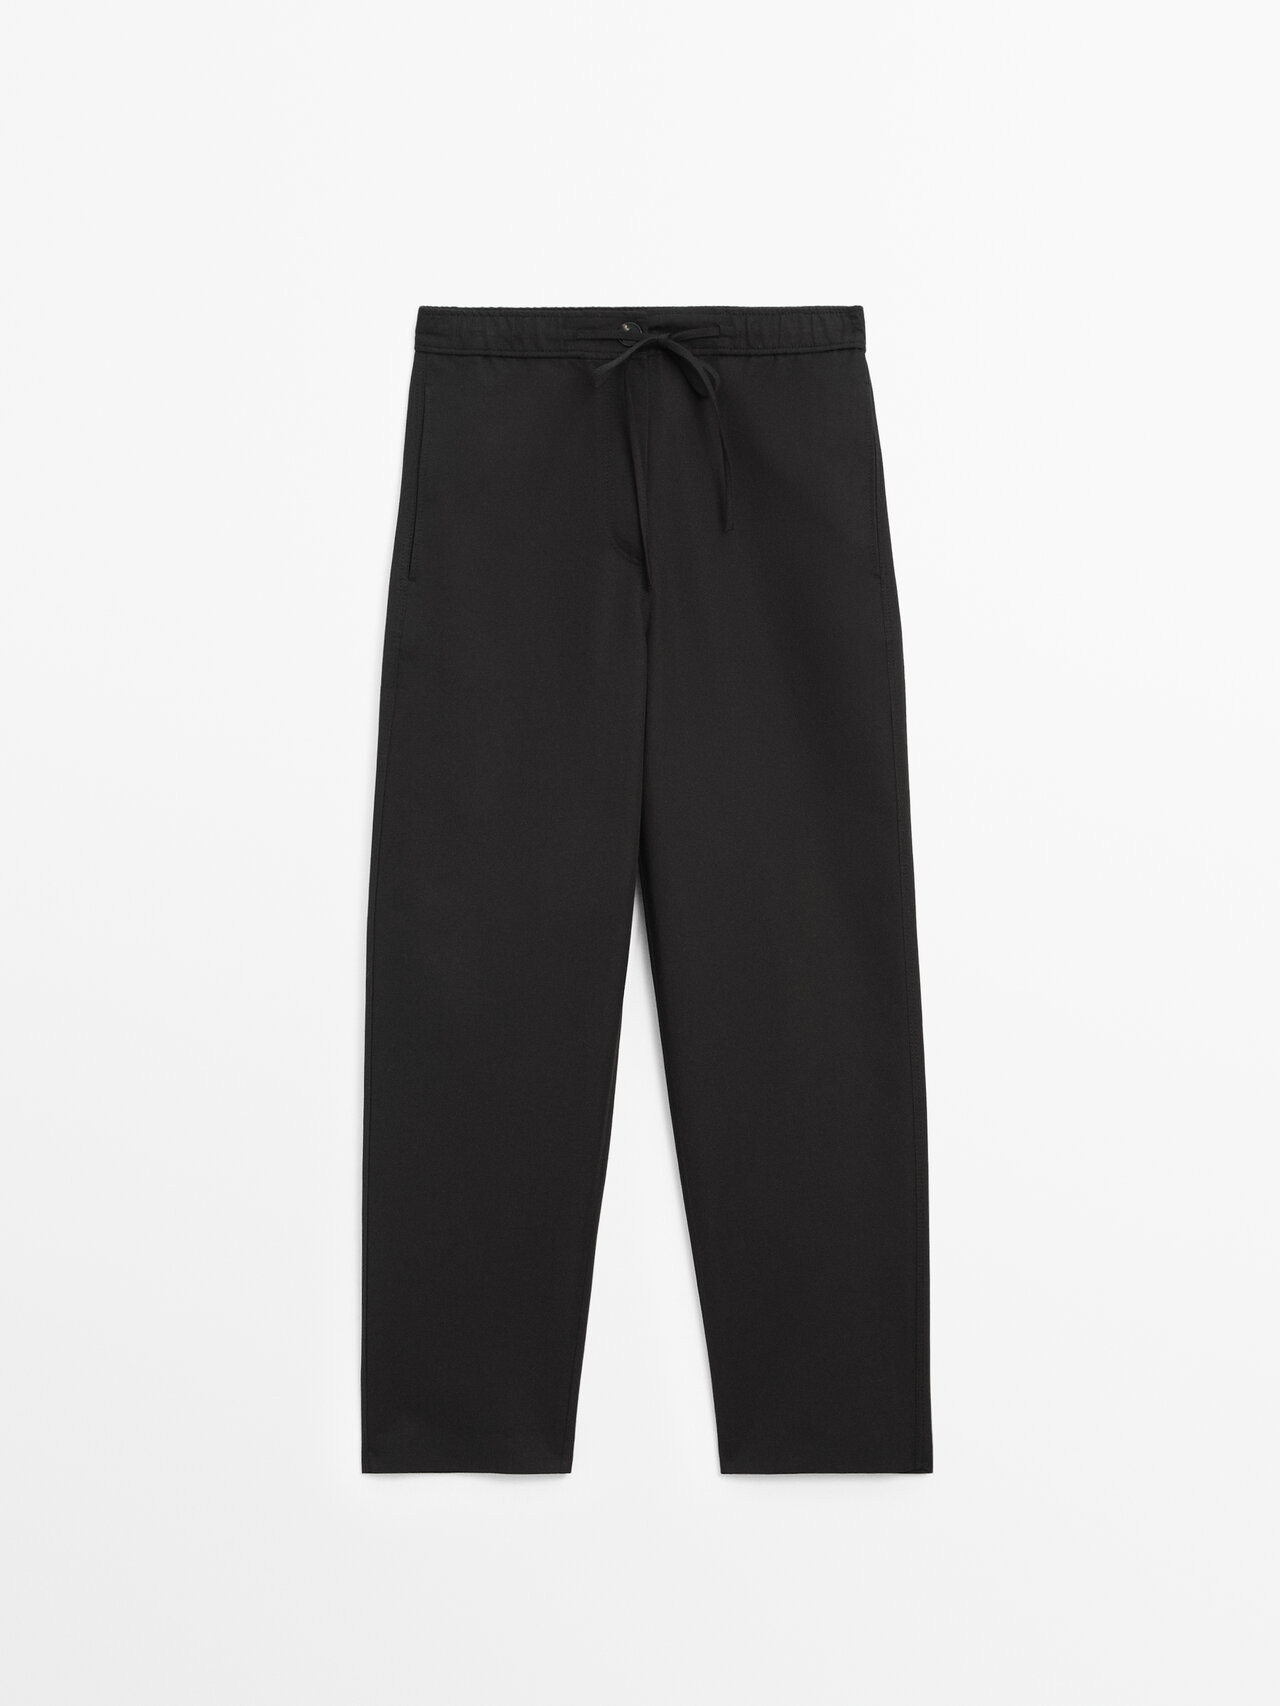 Massimo Dutti Cotton And Linen Blend Trousers With Drawstrings In Black